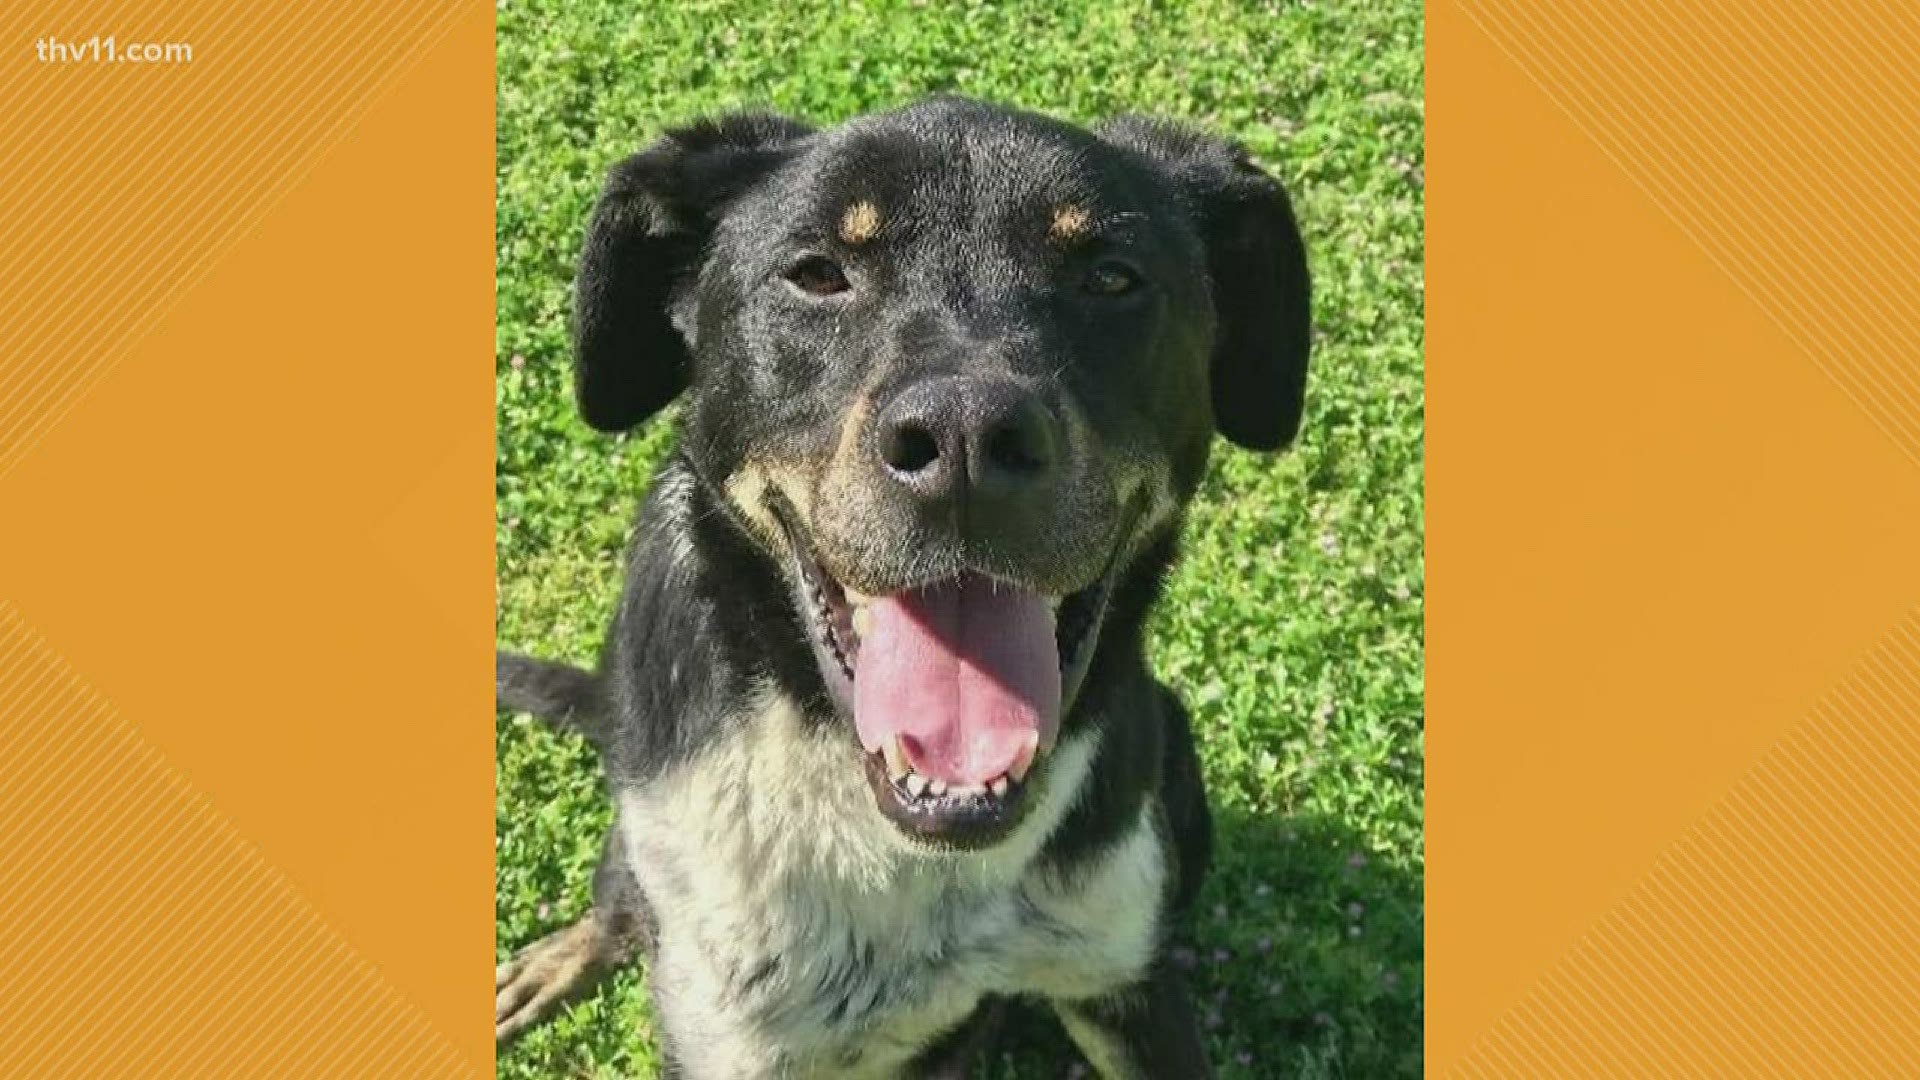 Banjo is about four years old and is an Australian Shepherd/Rottweiler mix. He has been at the Little Rock Animal Village since February 13.